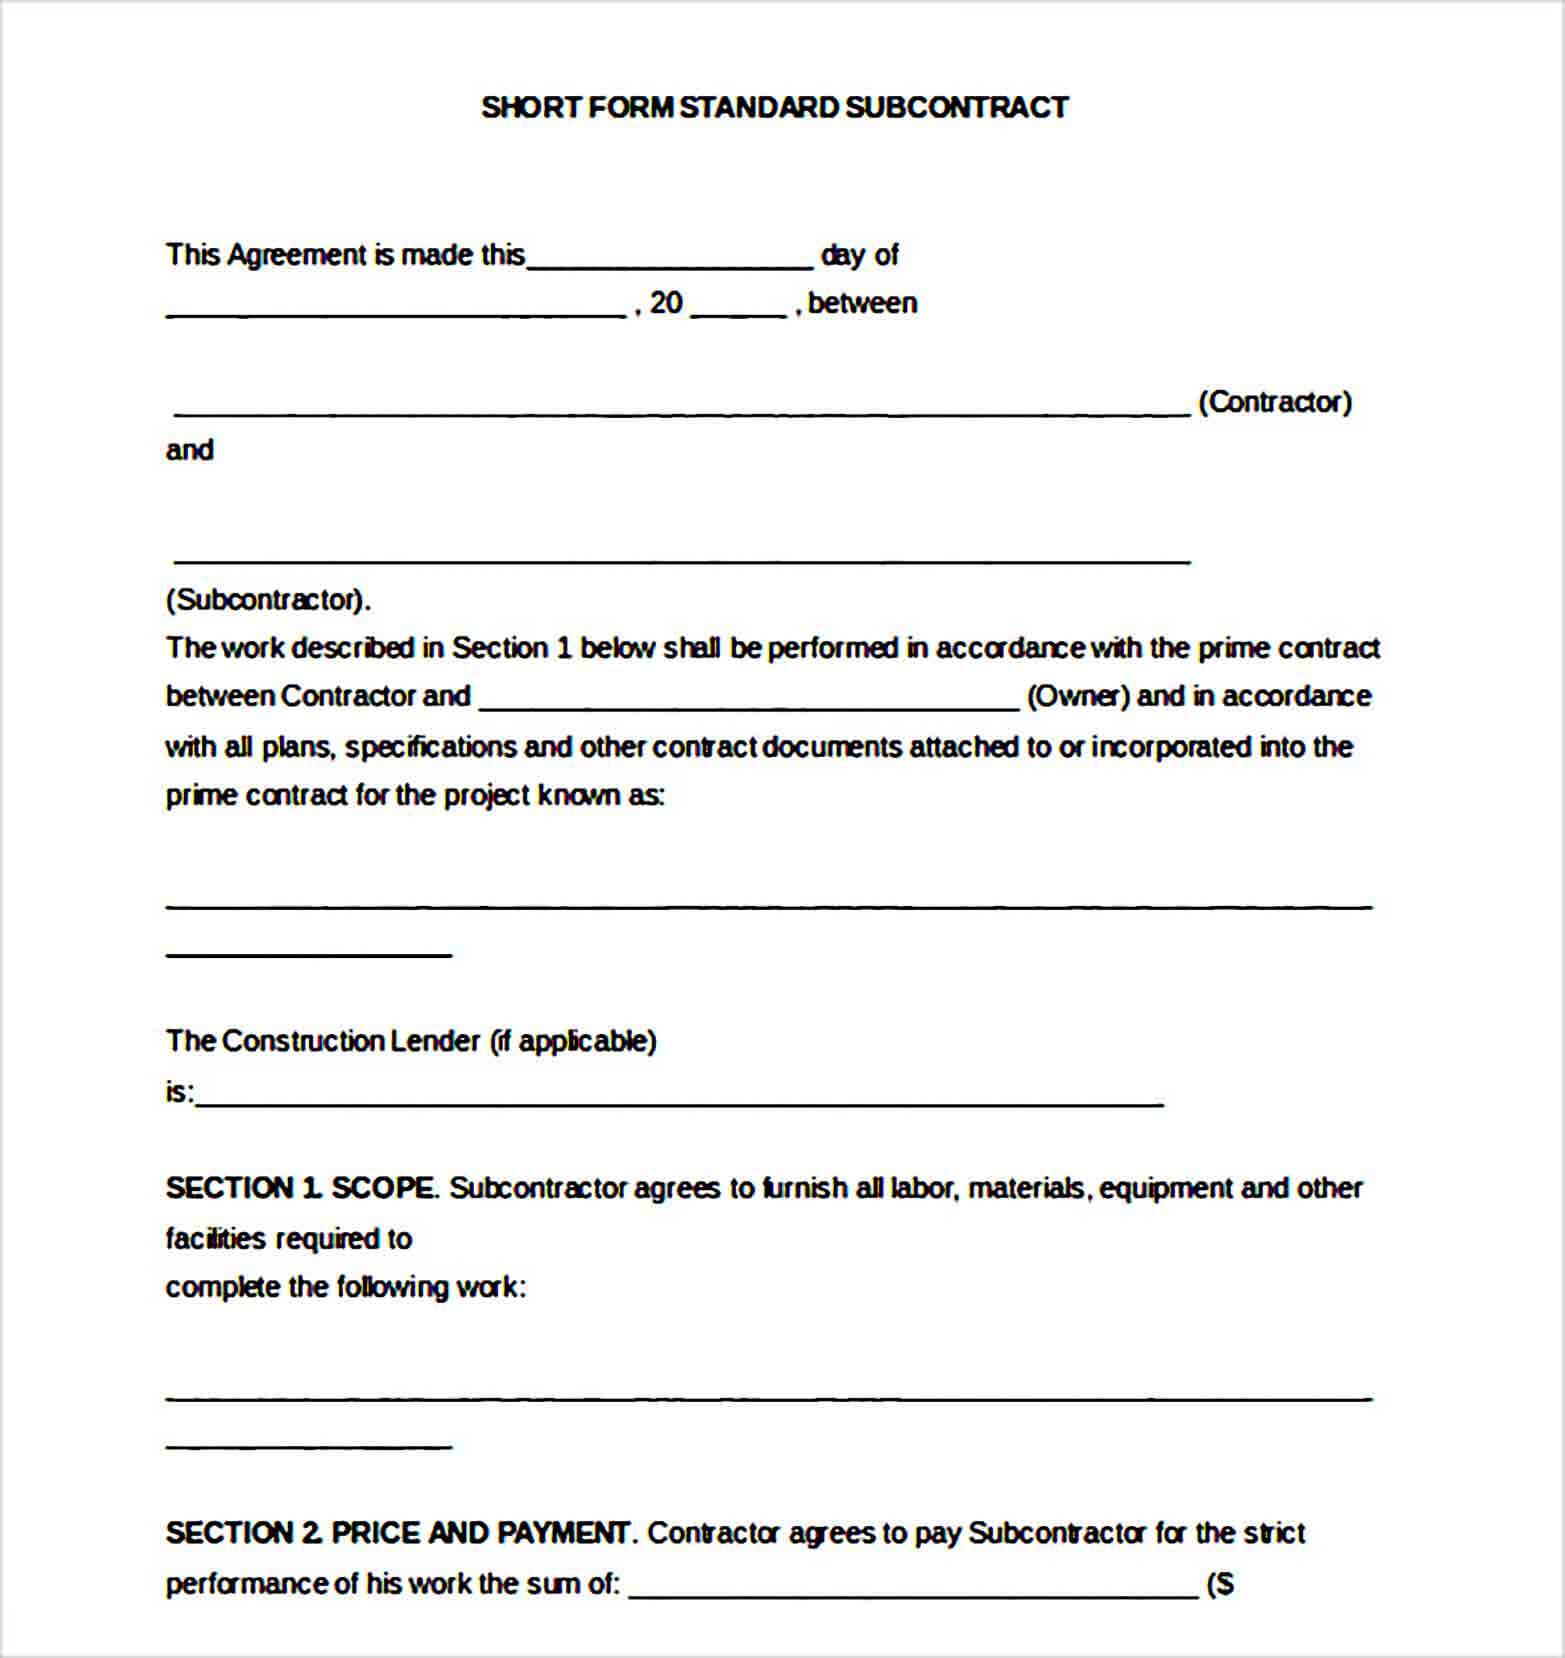 Short Form Subcontract Agreement1